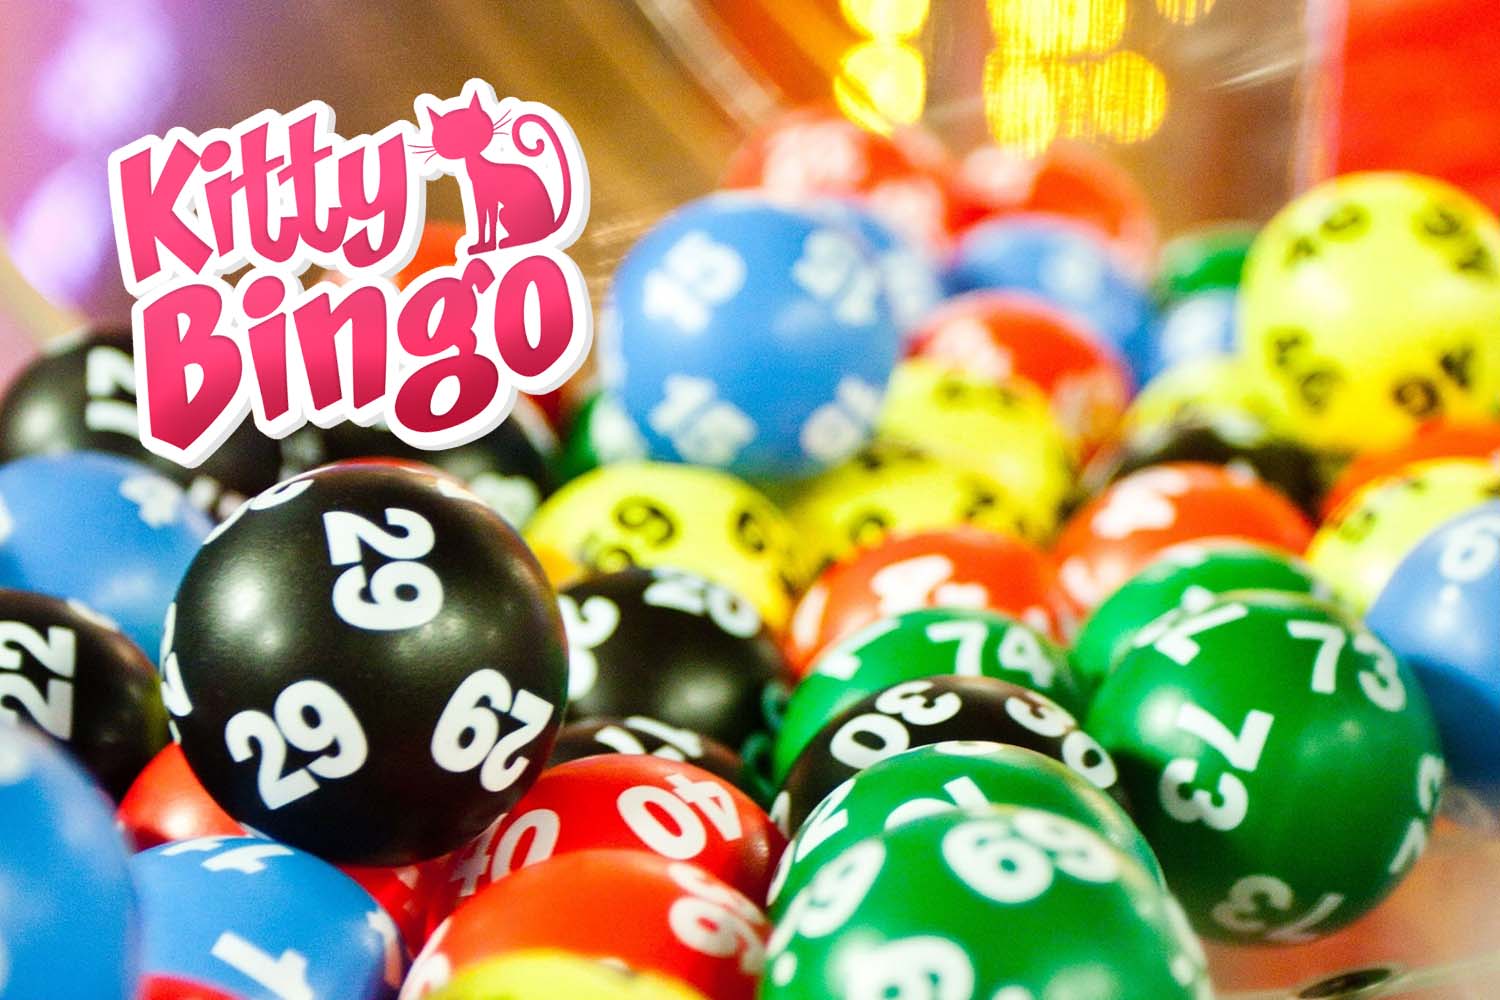 Kitty Bingo Review for United Kingdom Players: Pros, Cons, and More